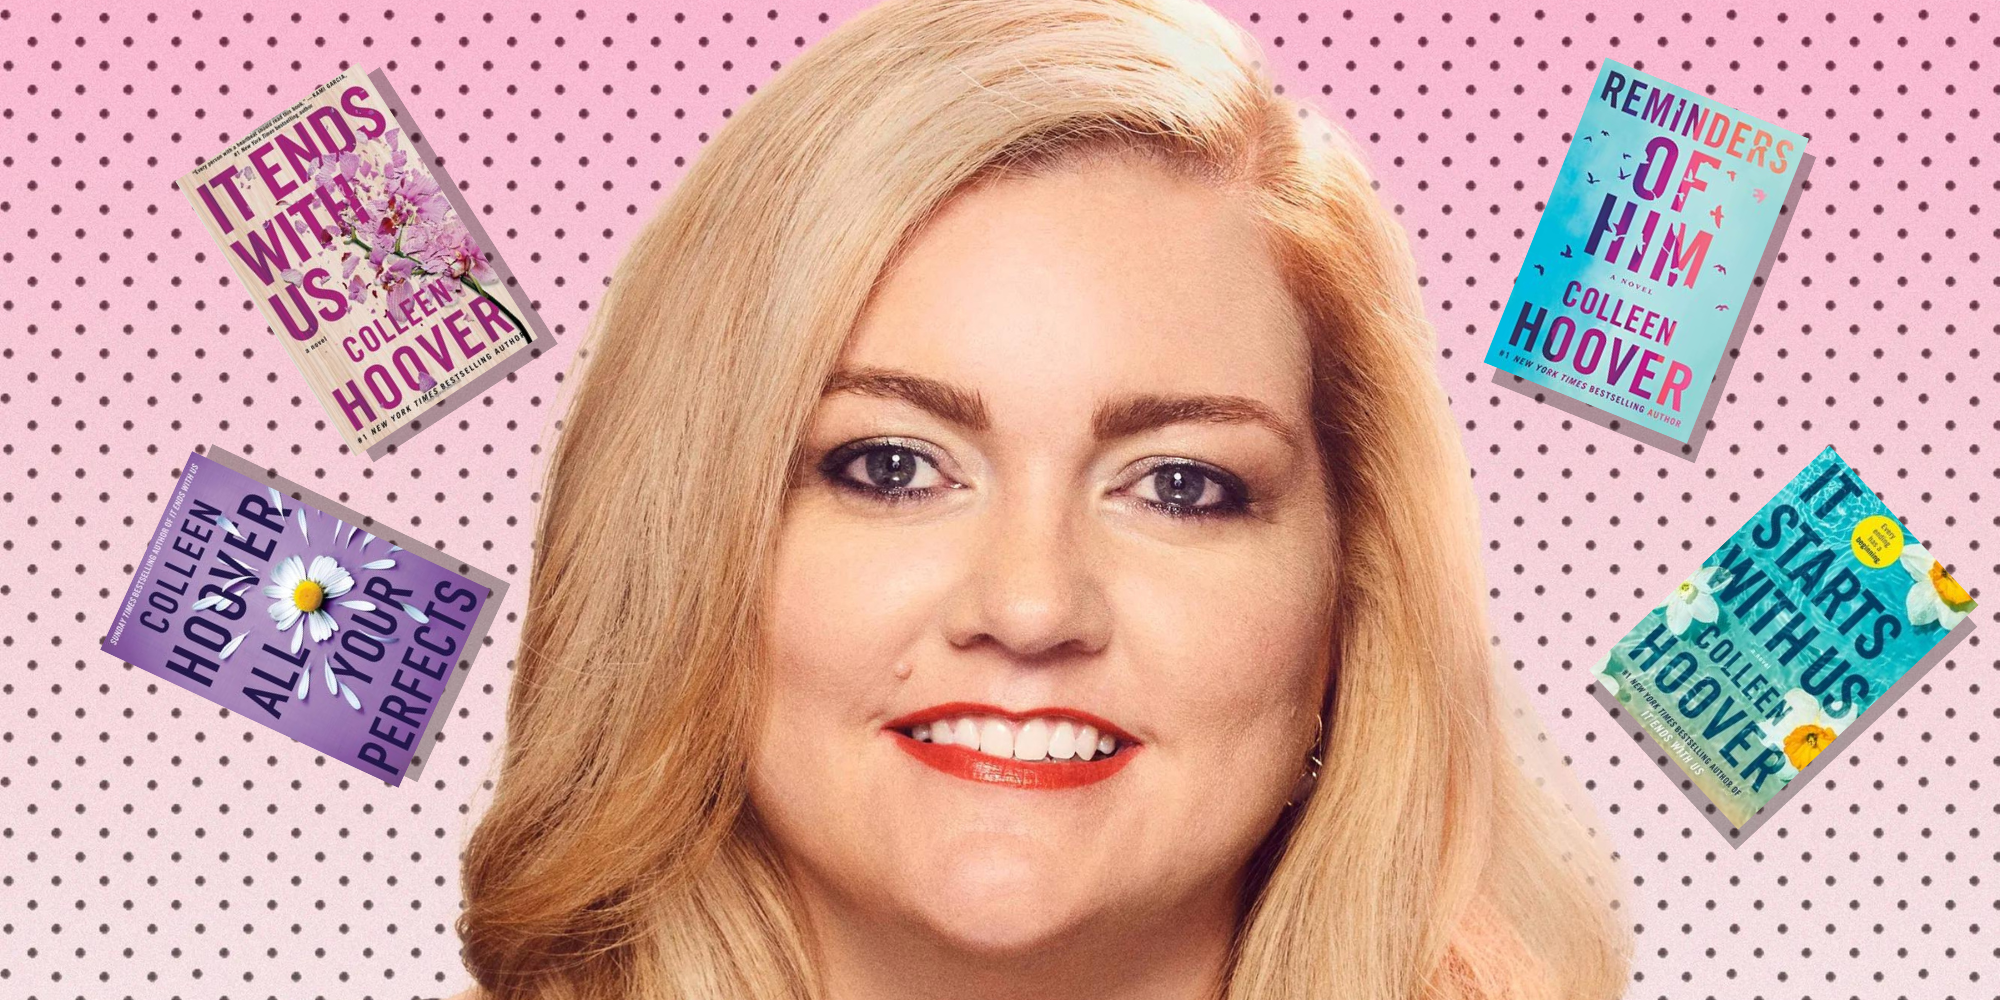 Colleen Hoover Picks Her Riskiest and Most Romantic Novels